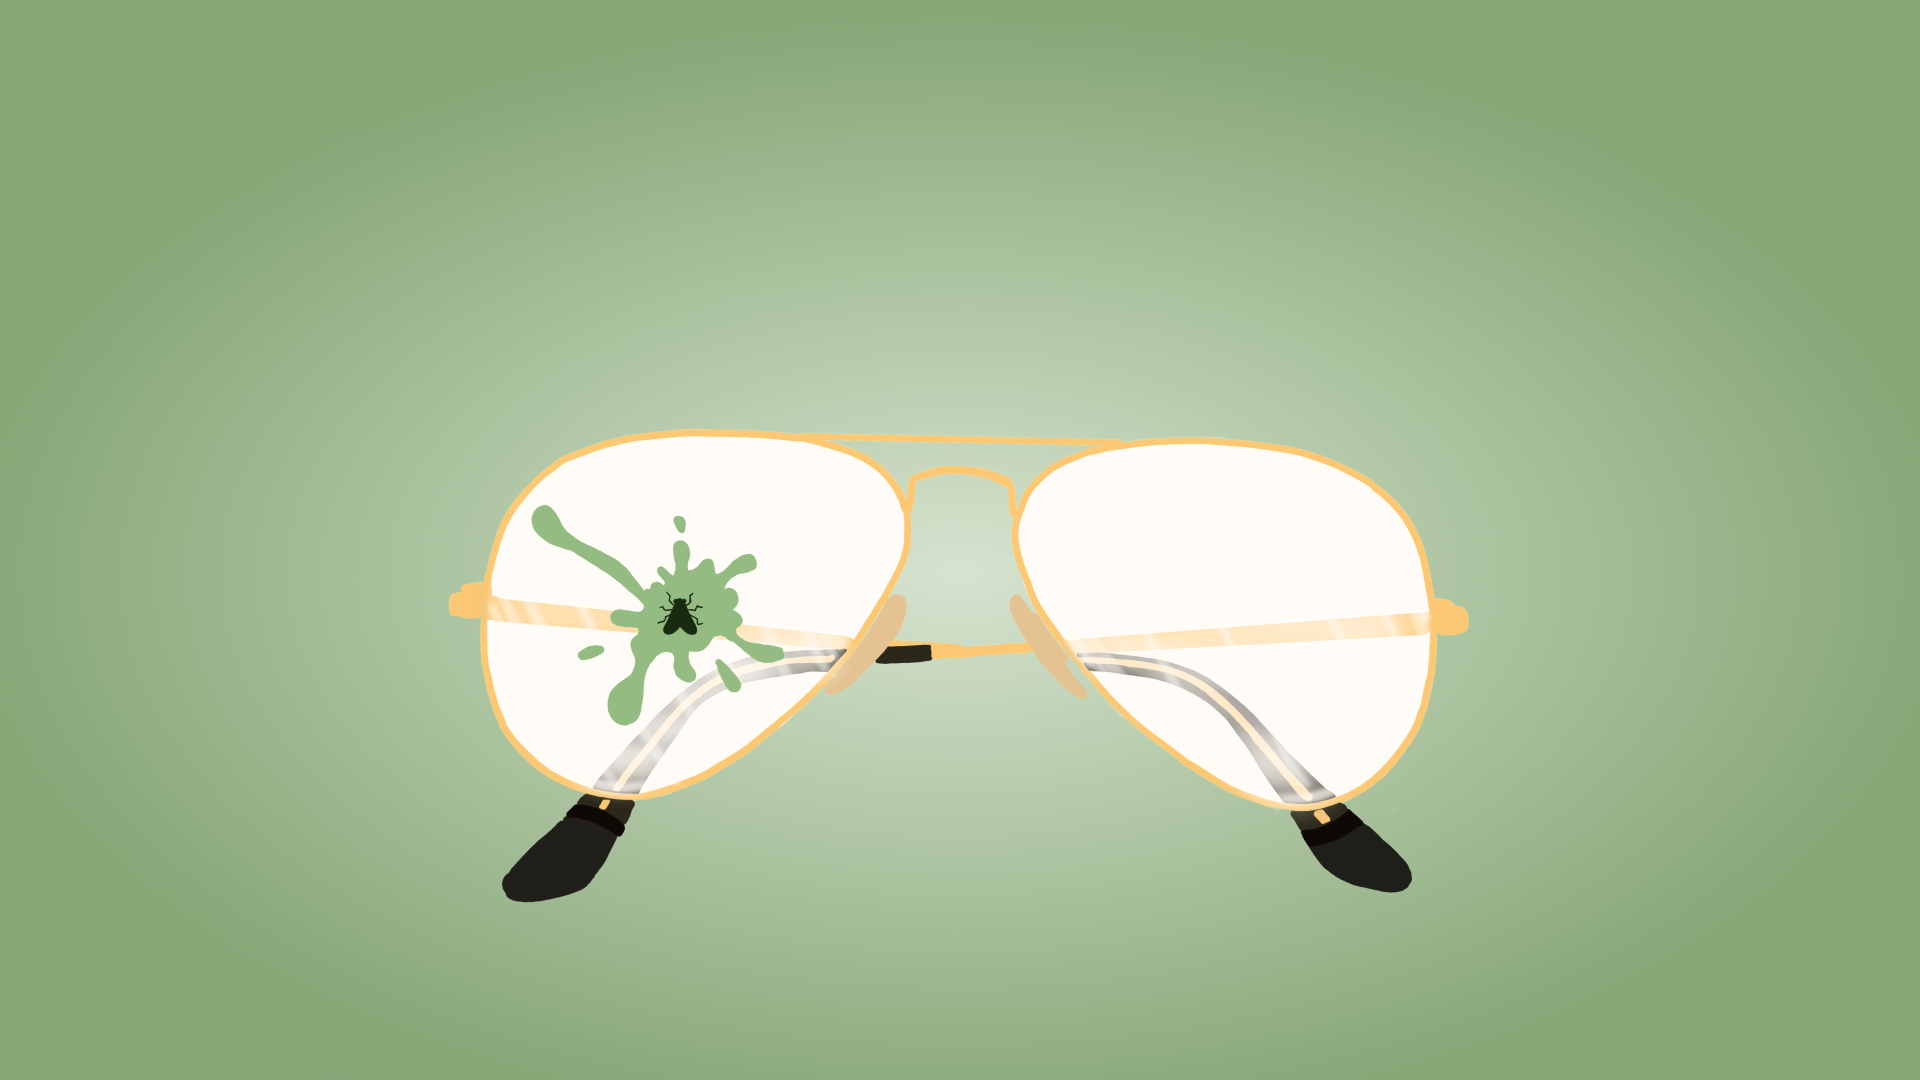 illustration of a pair of aviator-style glasses with a fly splattered on the front of one lens